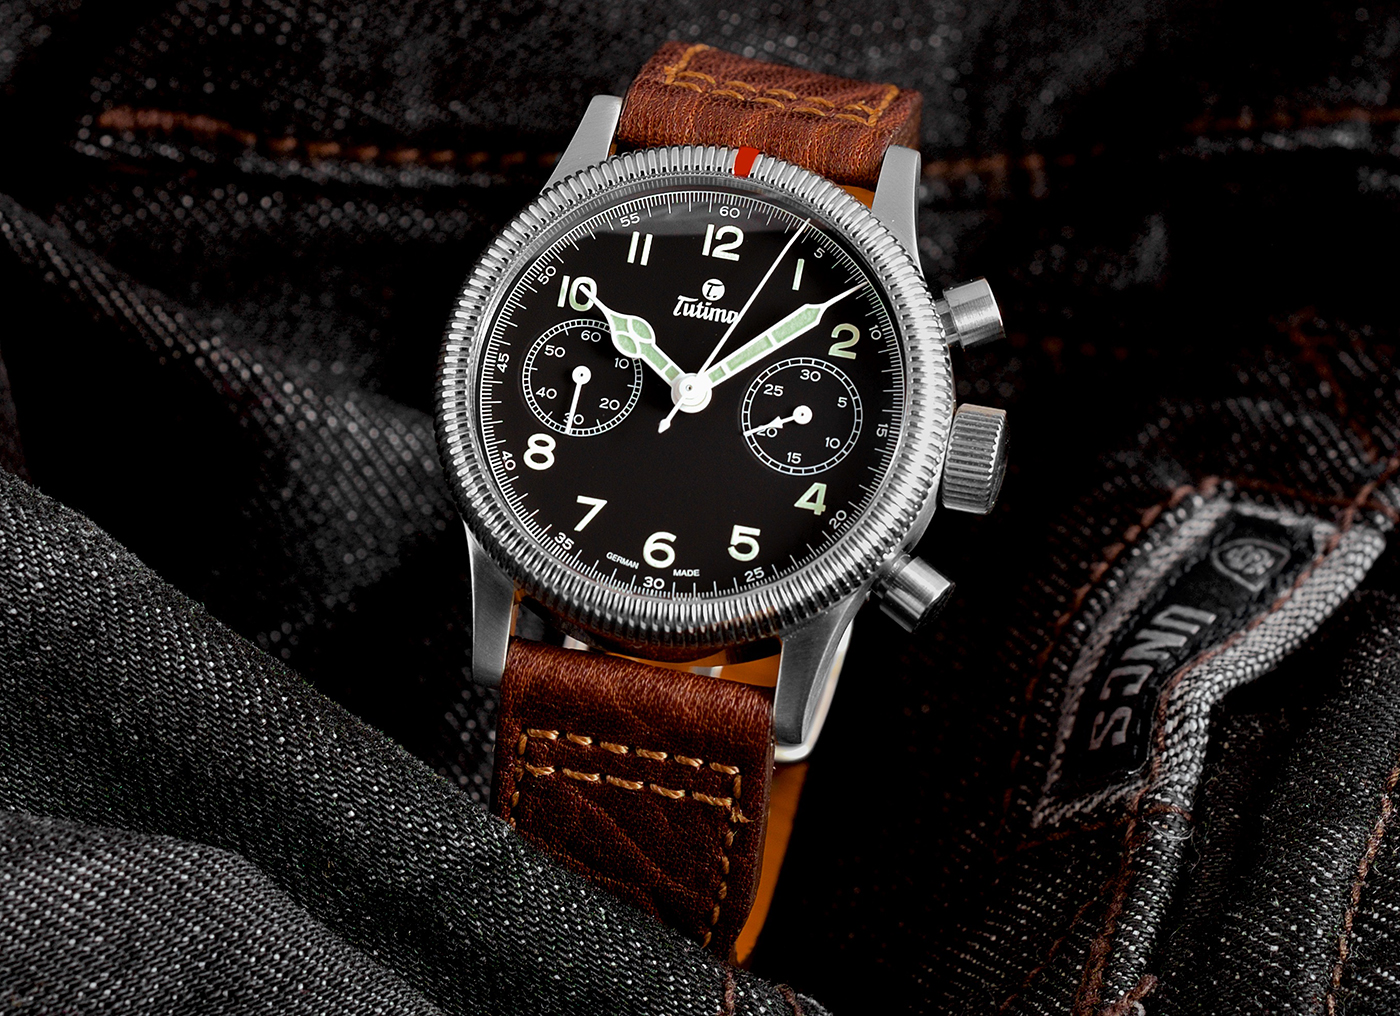 Tutima Unveils Limited-Edition Flieger Friday Chronograph | aBlogtoWatch